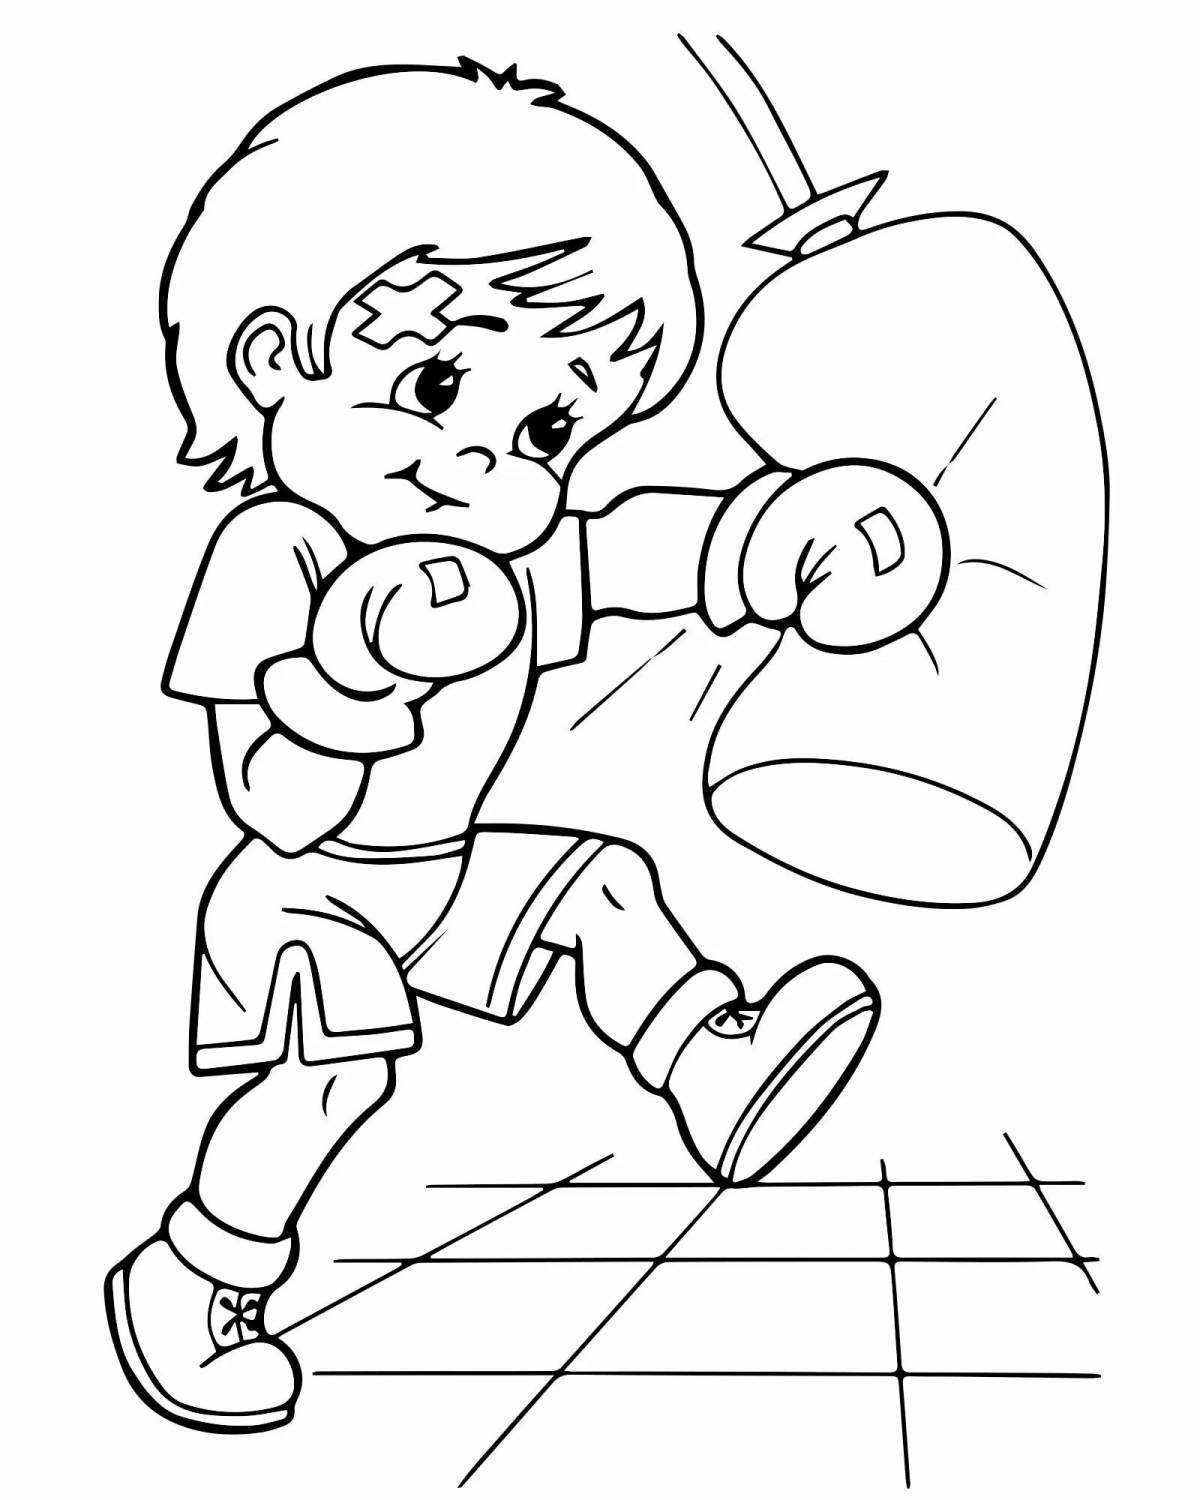 Wonderful boxing and boo coloring for kids